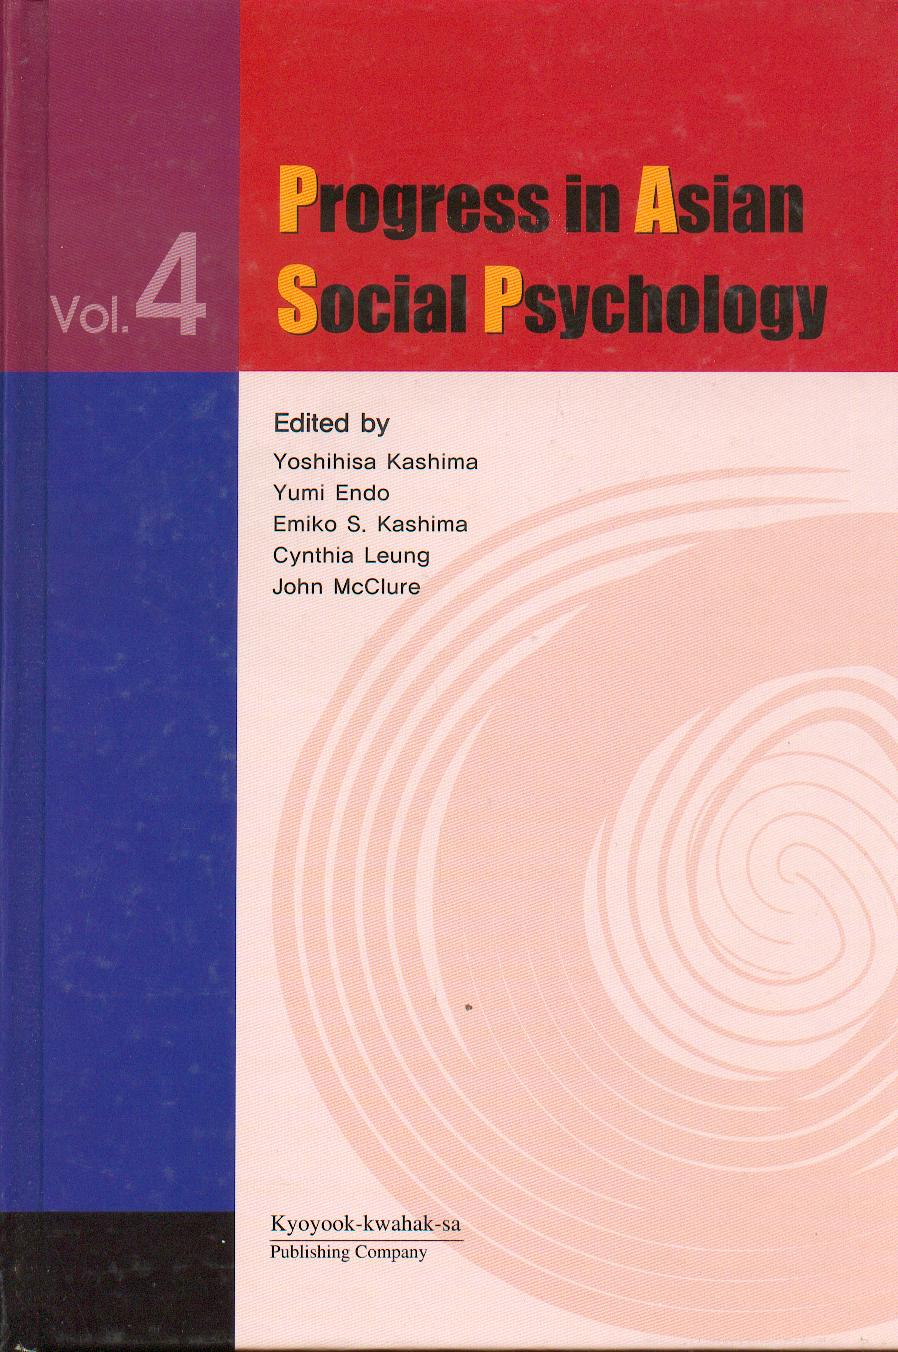 PROGRESS IN ASIAN SOCIAL PSYCHOLGY,THEORETICAL AND EMPIRICAL CONTRIBUTIONS